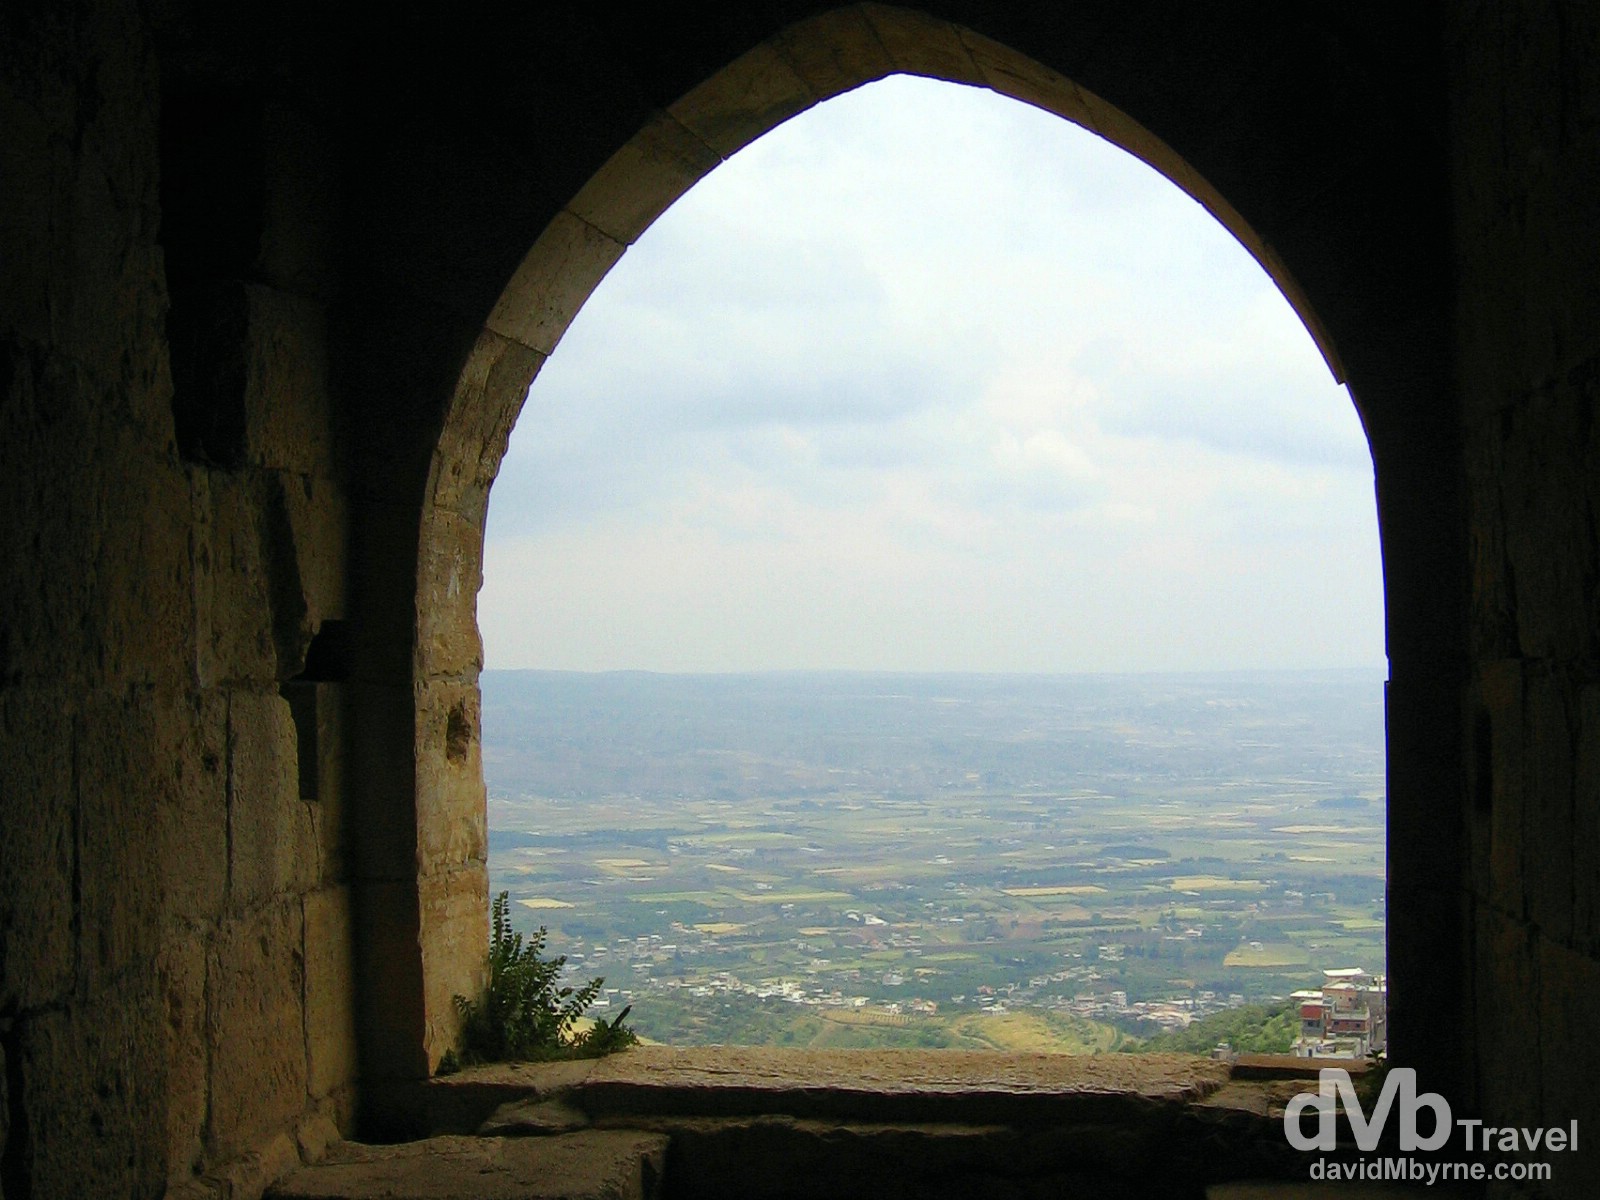 The view of the Syrian countryside from an opening of the Crusader castle Crac des Chevaliers. May 7, 2008.